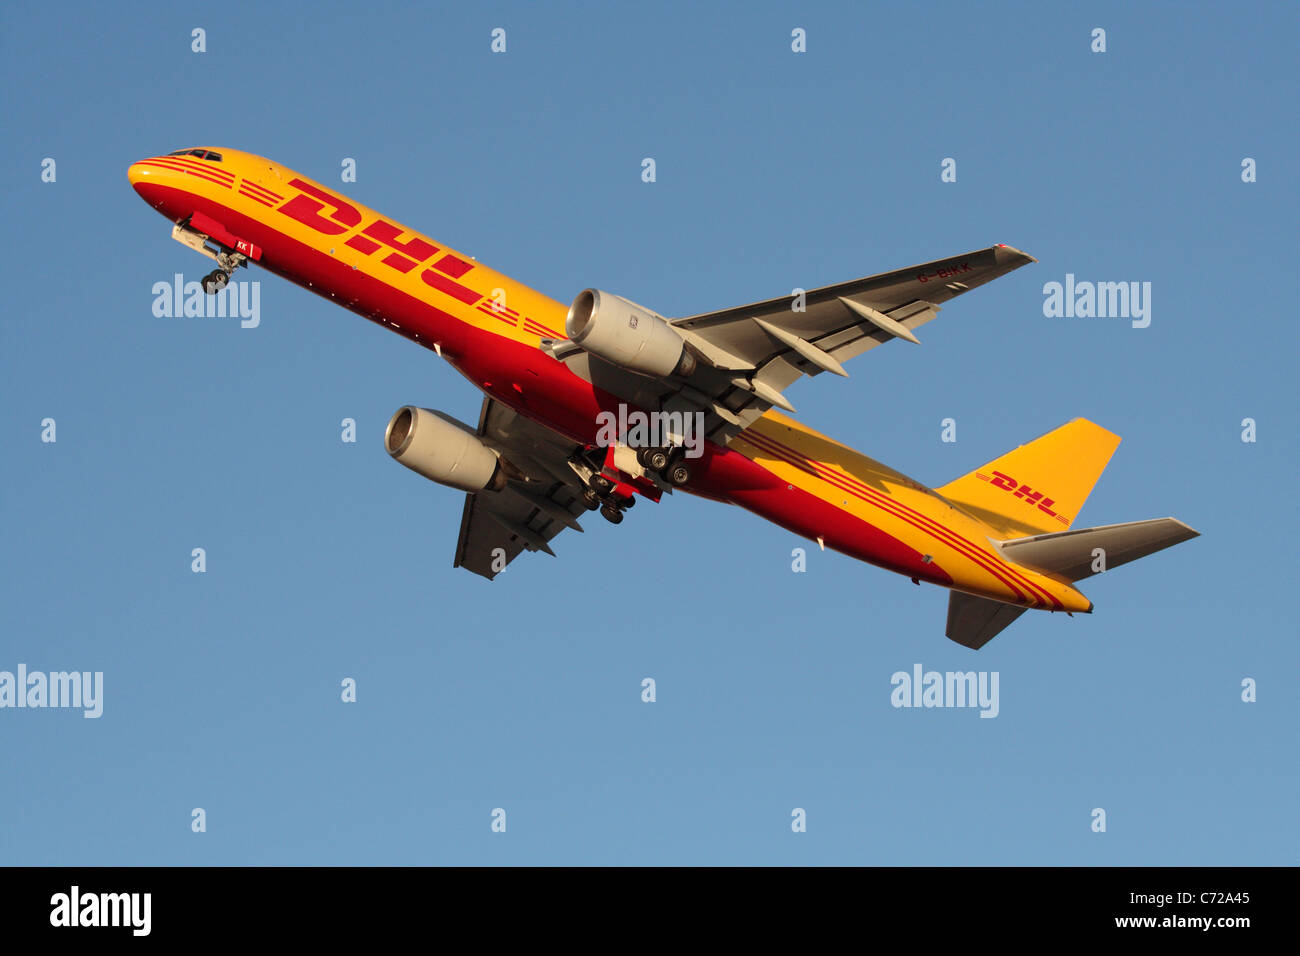 Freight transport by air. DHL Boeing 757-200F cargo jet plane taking off at sunset. International trade. Global route network. Civil aviation. Stock Photo